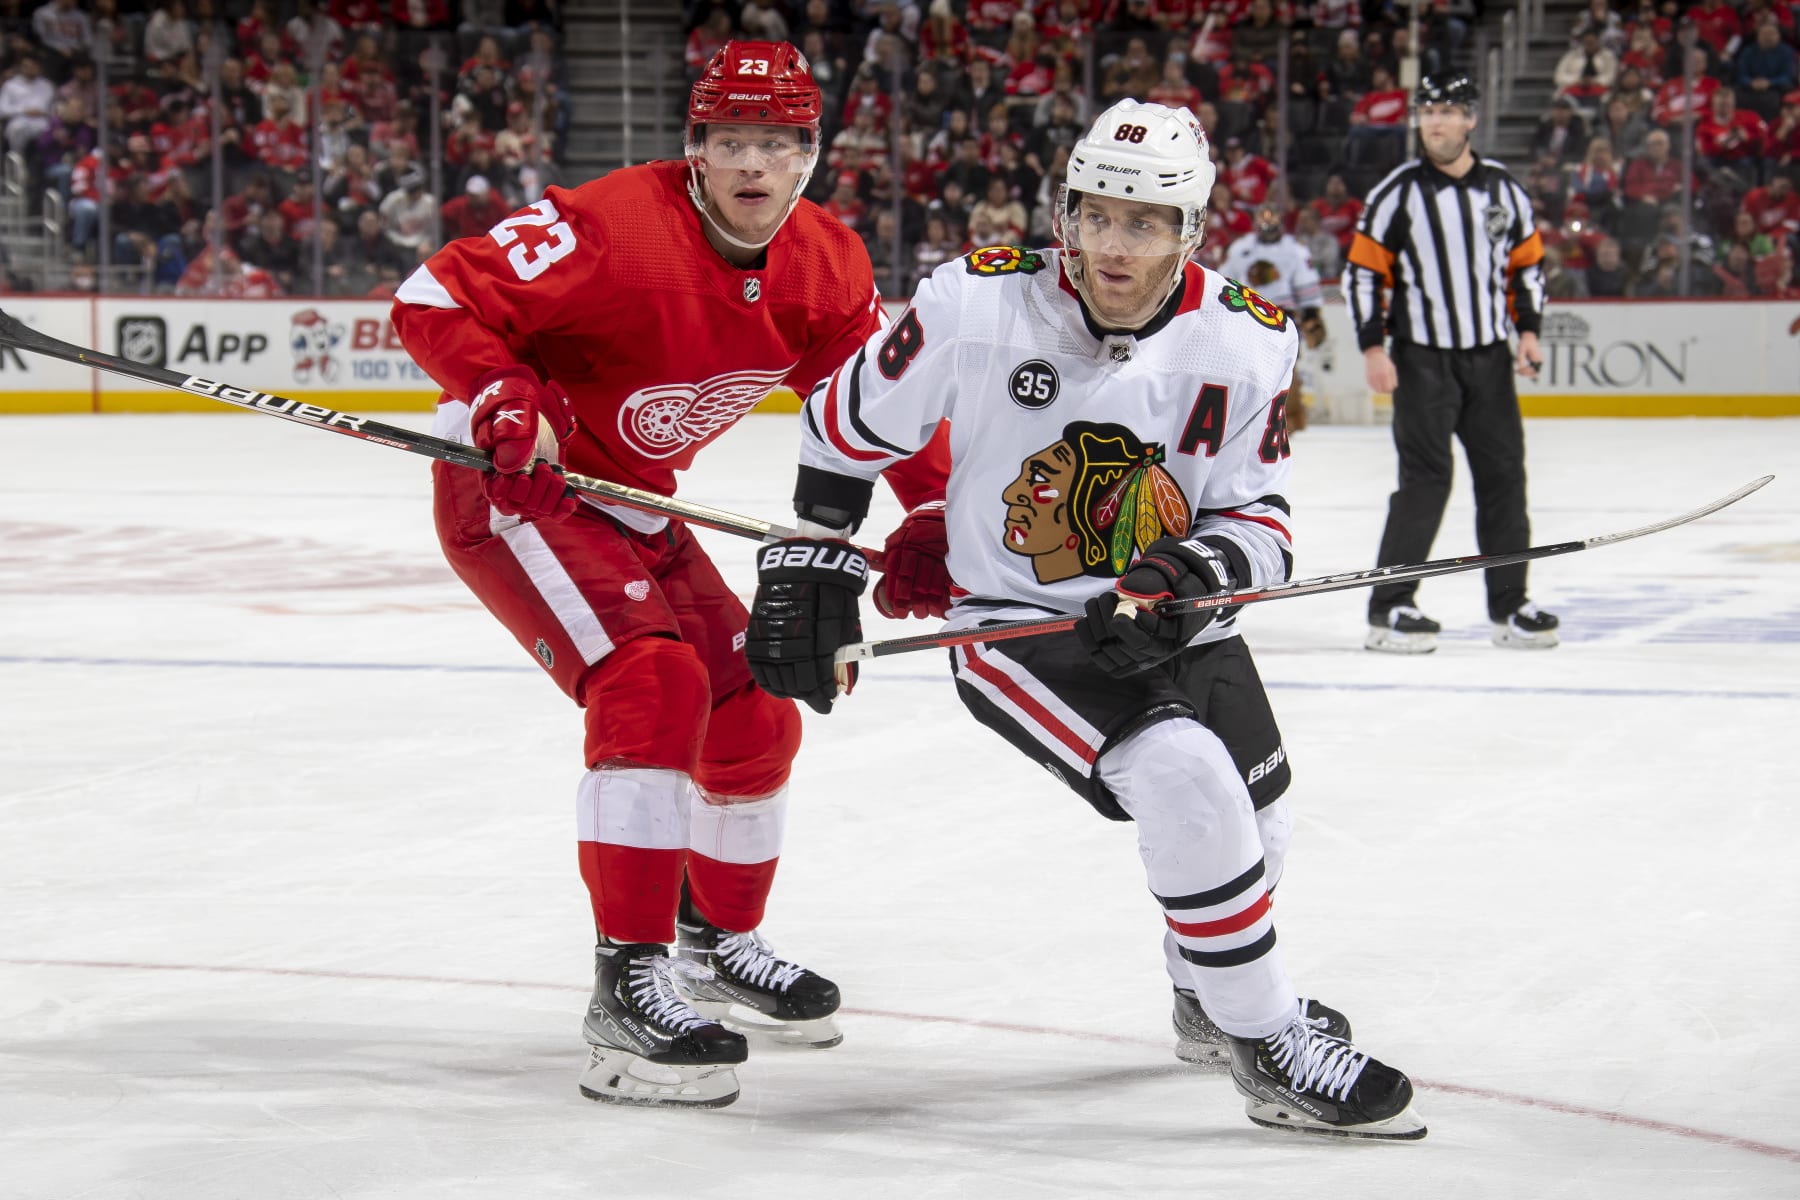 NHL Rumors: Is Patrick Kane destined for the Detroit Red Wings